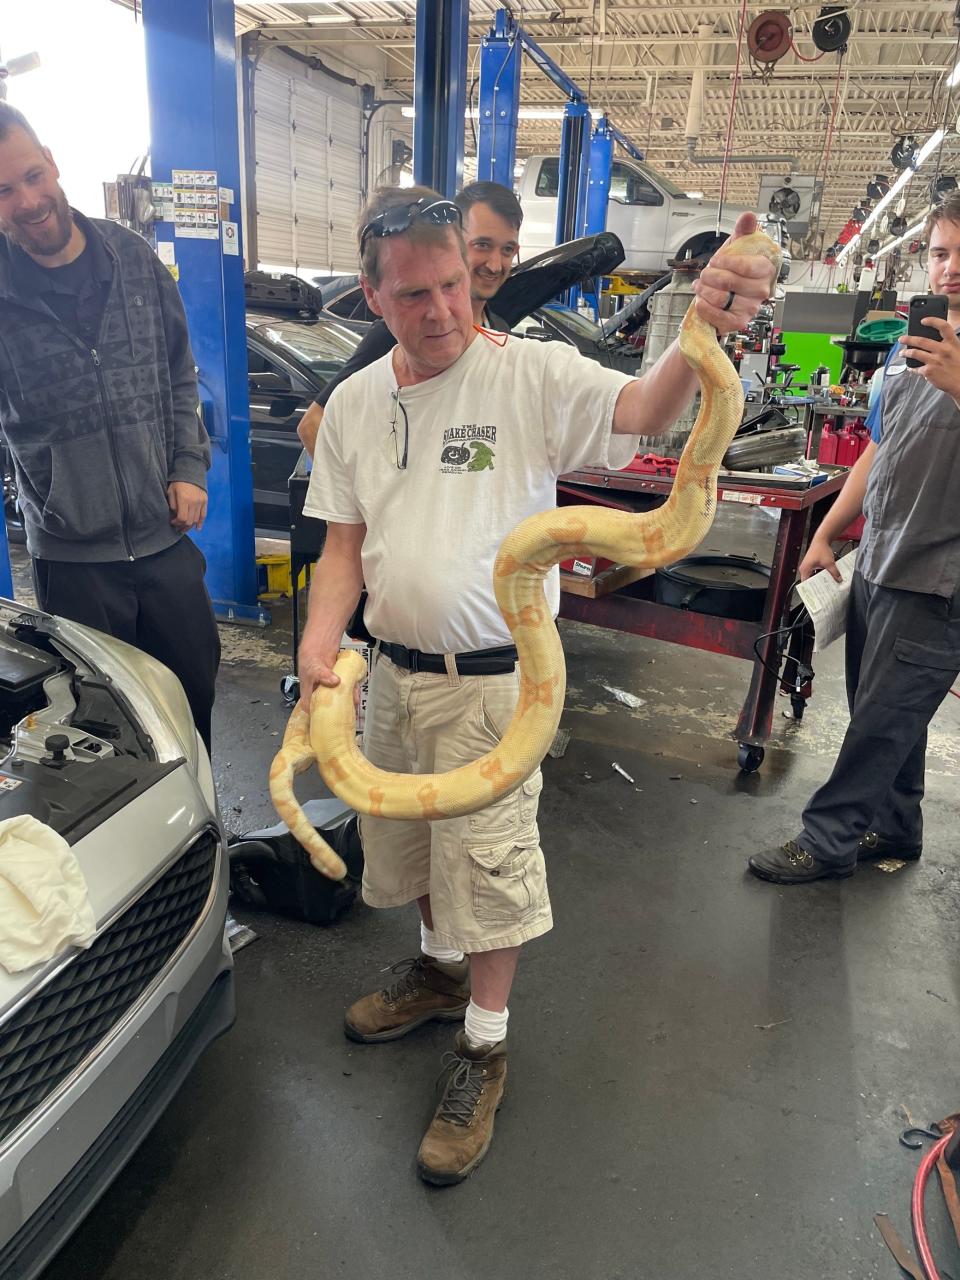 Russell Cavender pulled an 8-foot-long albino boa constrictor out of a car’s engine.